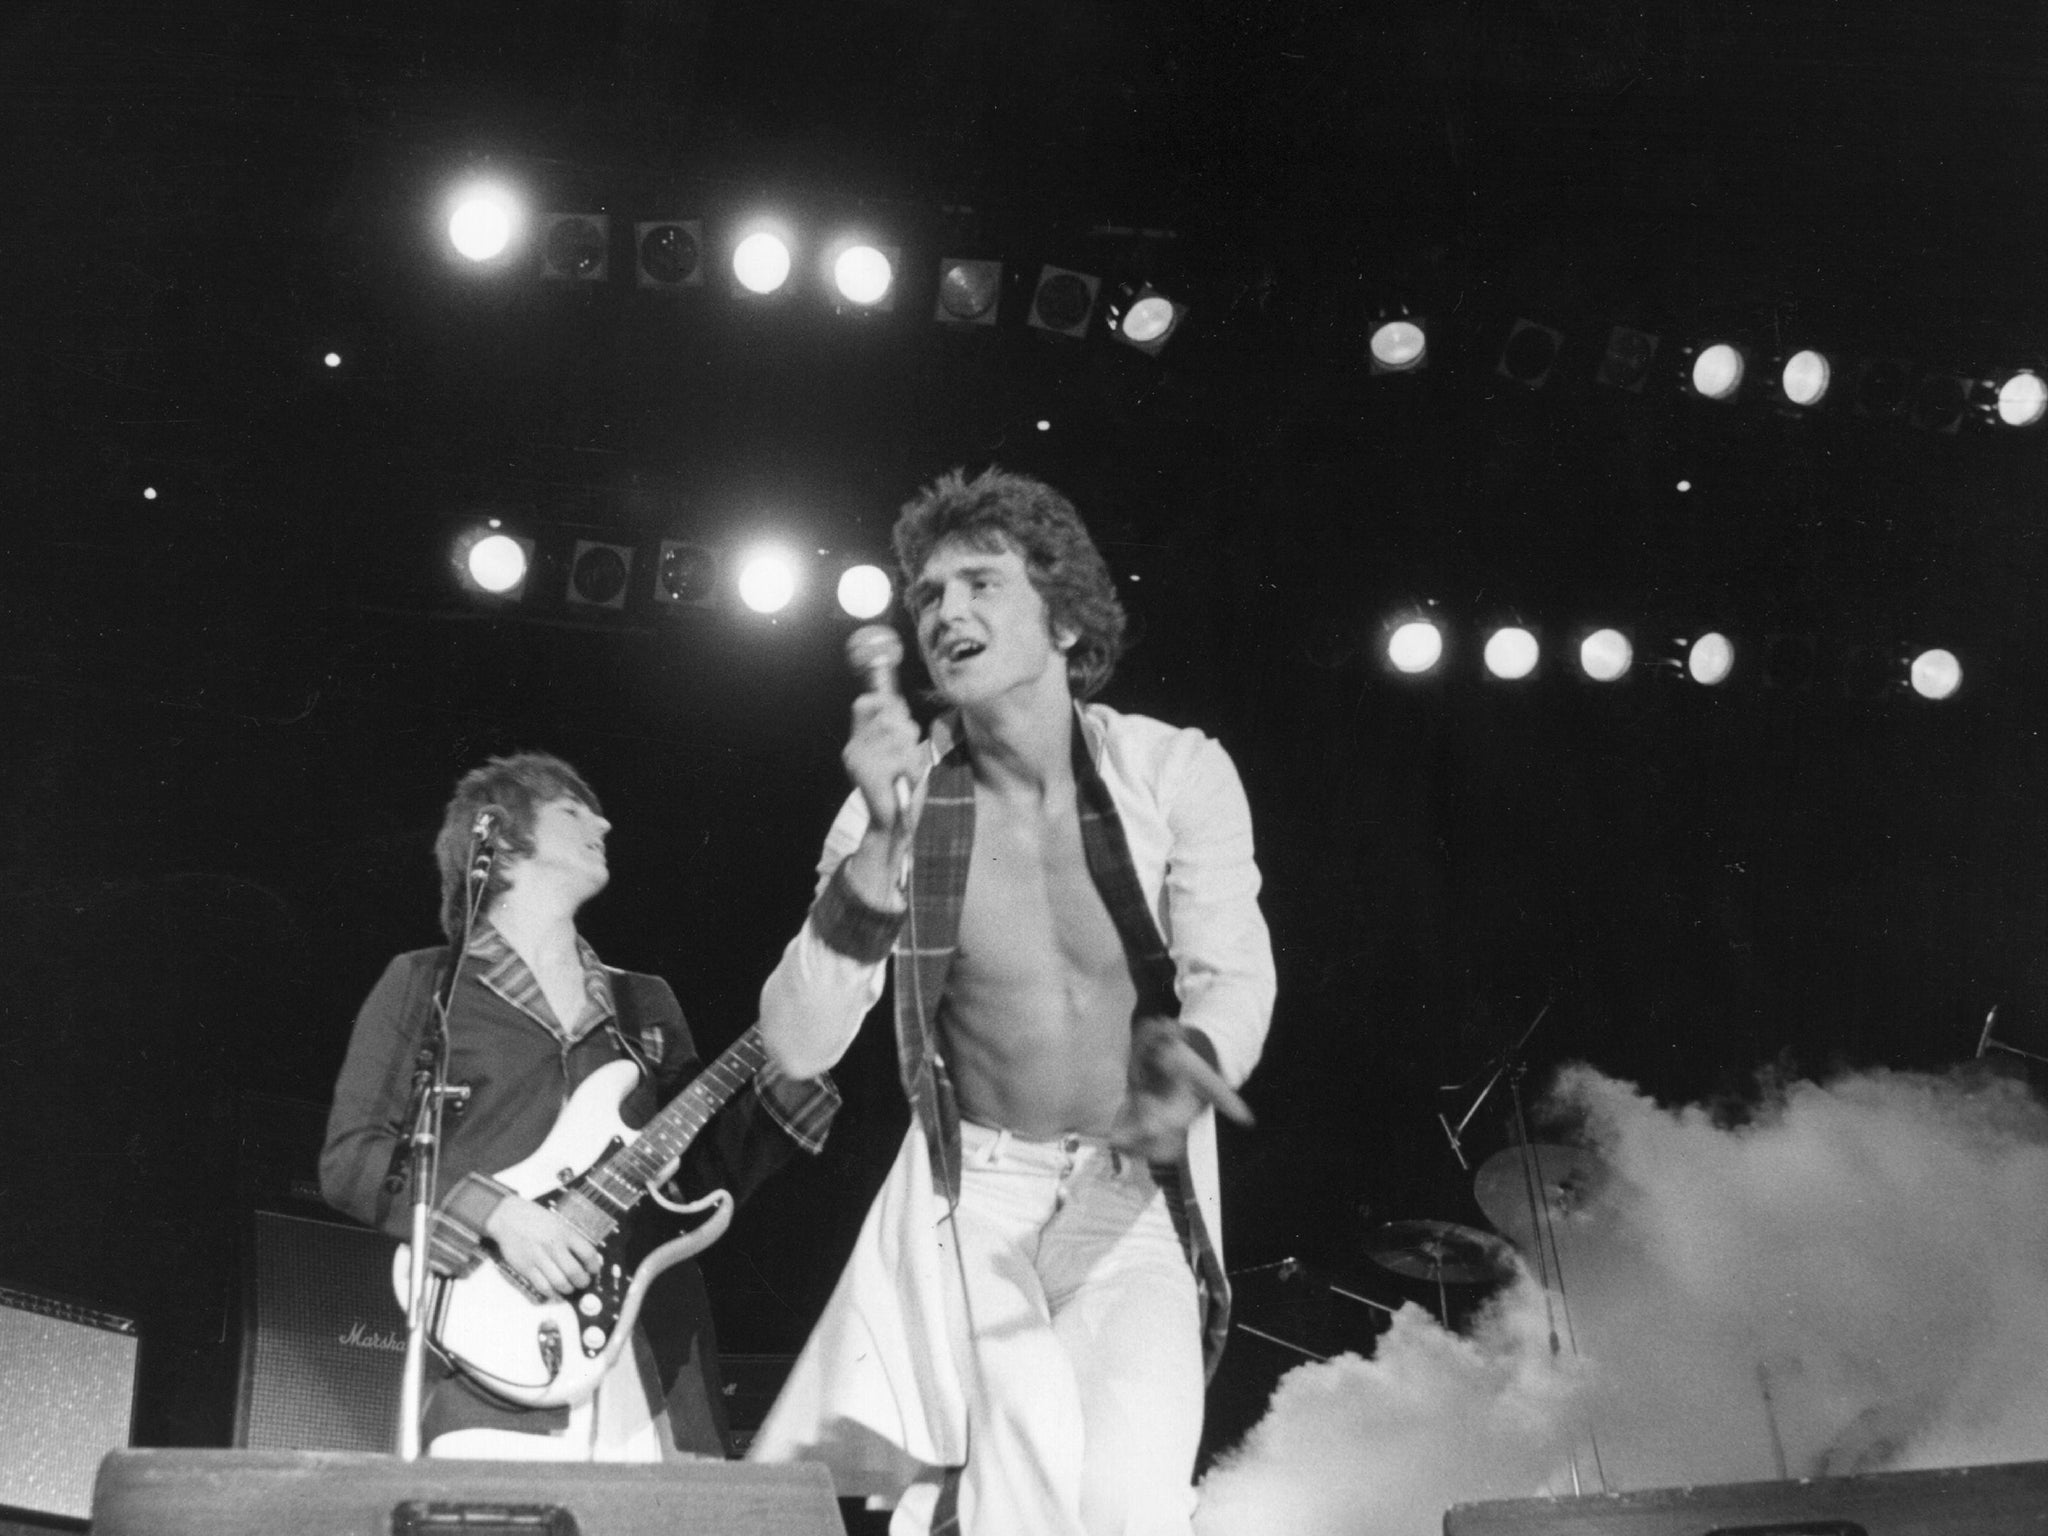 The singer performing at the Budokan in Tokyo in 1976